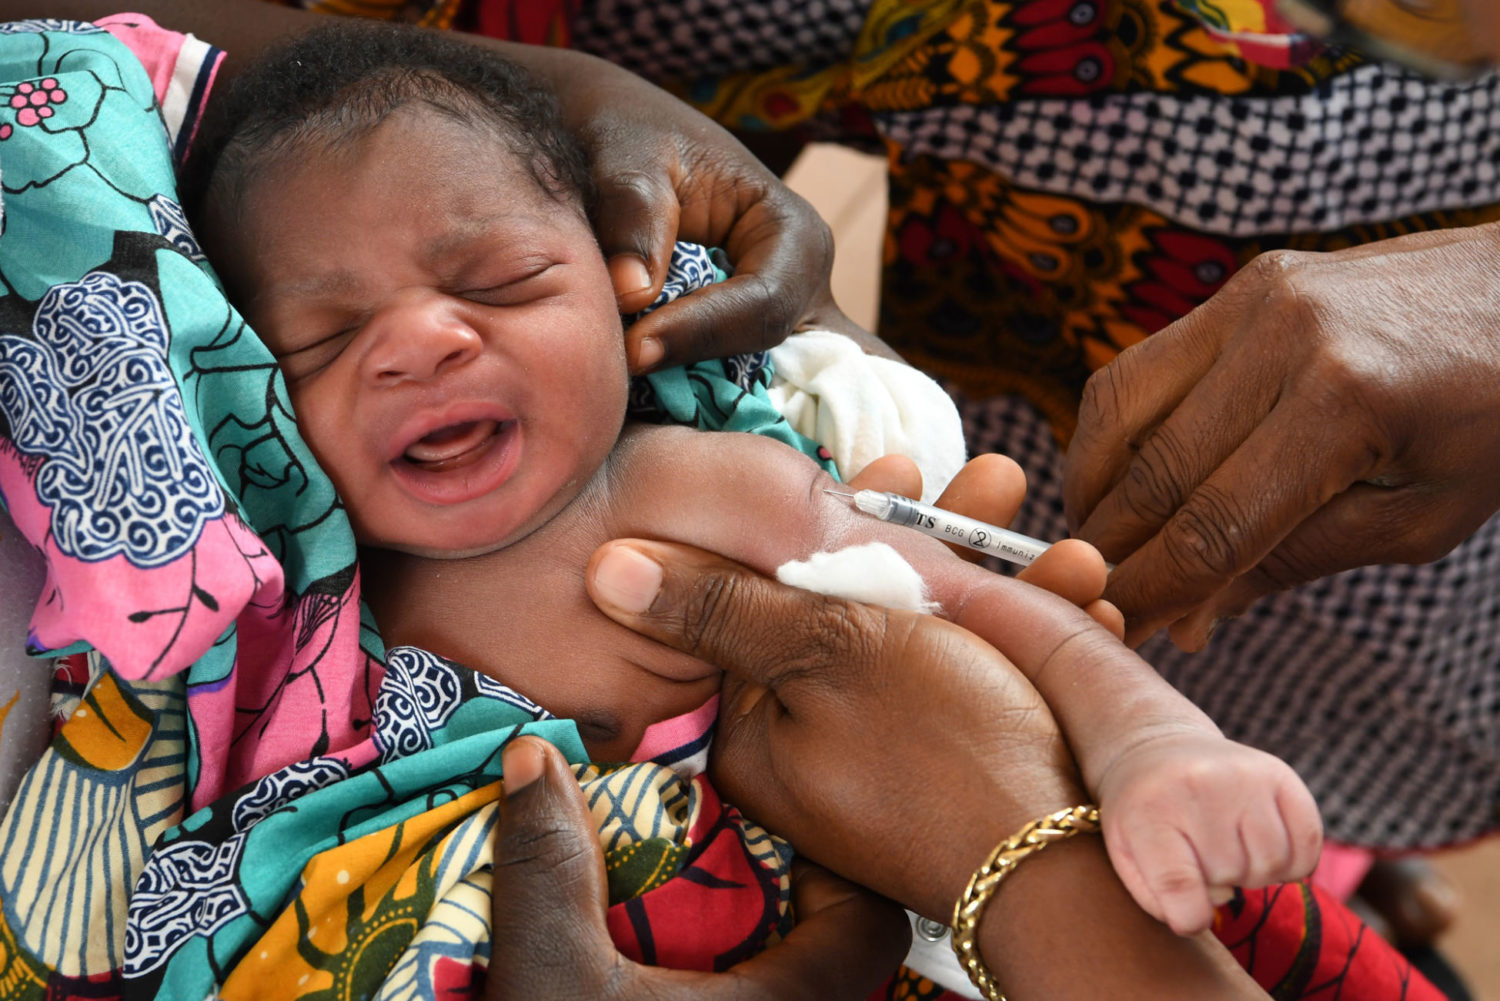 A baby receives vaccinations in Cote D'Ivoire